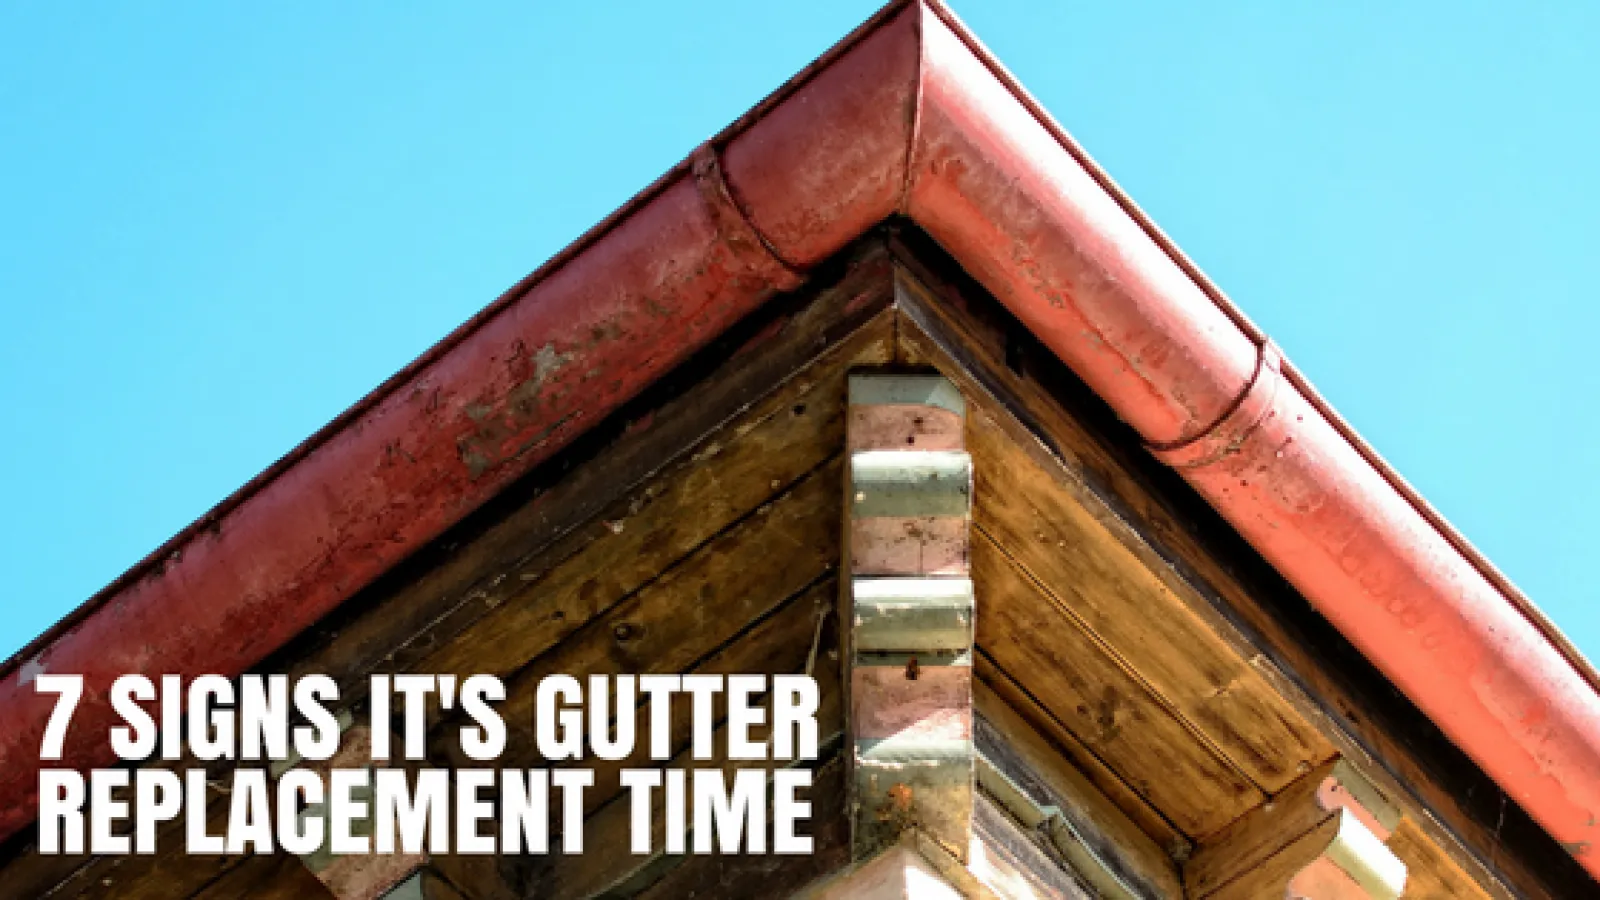 7 Signs It’s Gutter Replacement Time